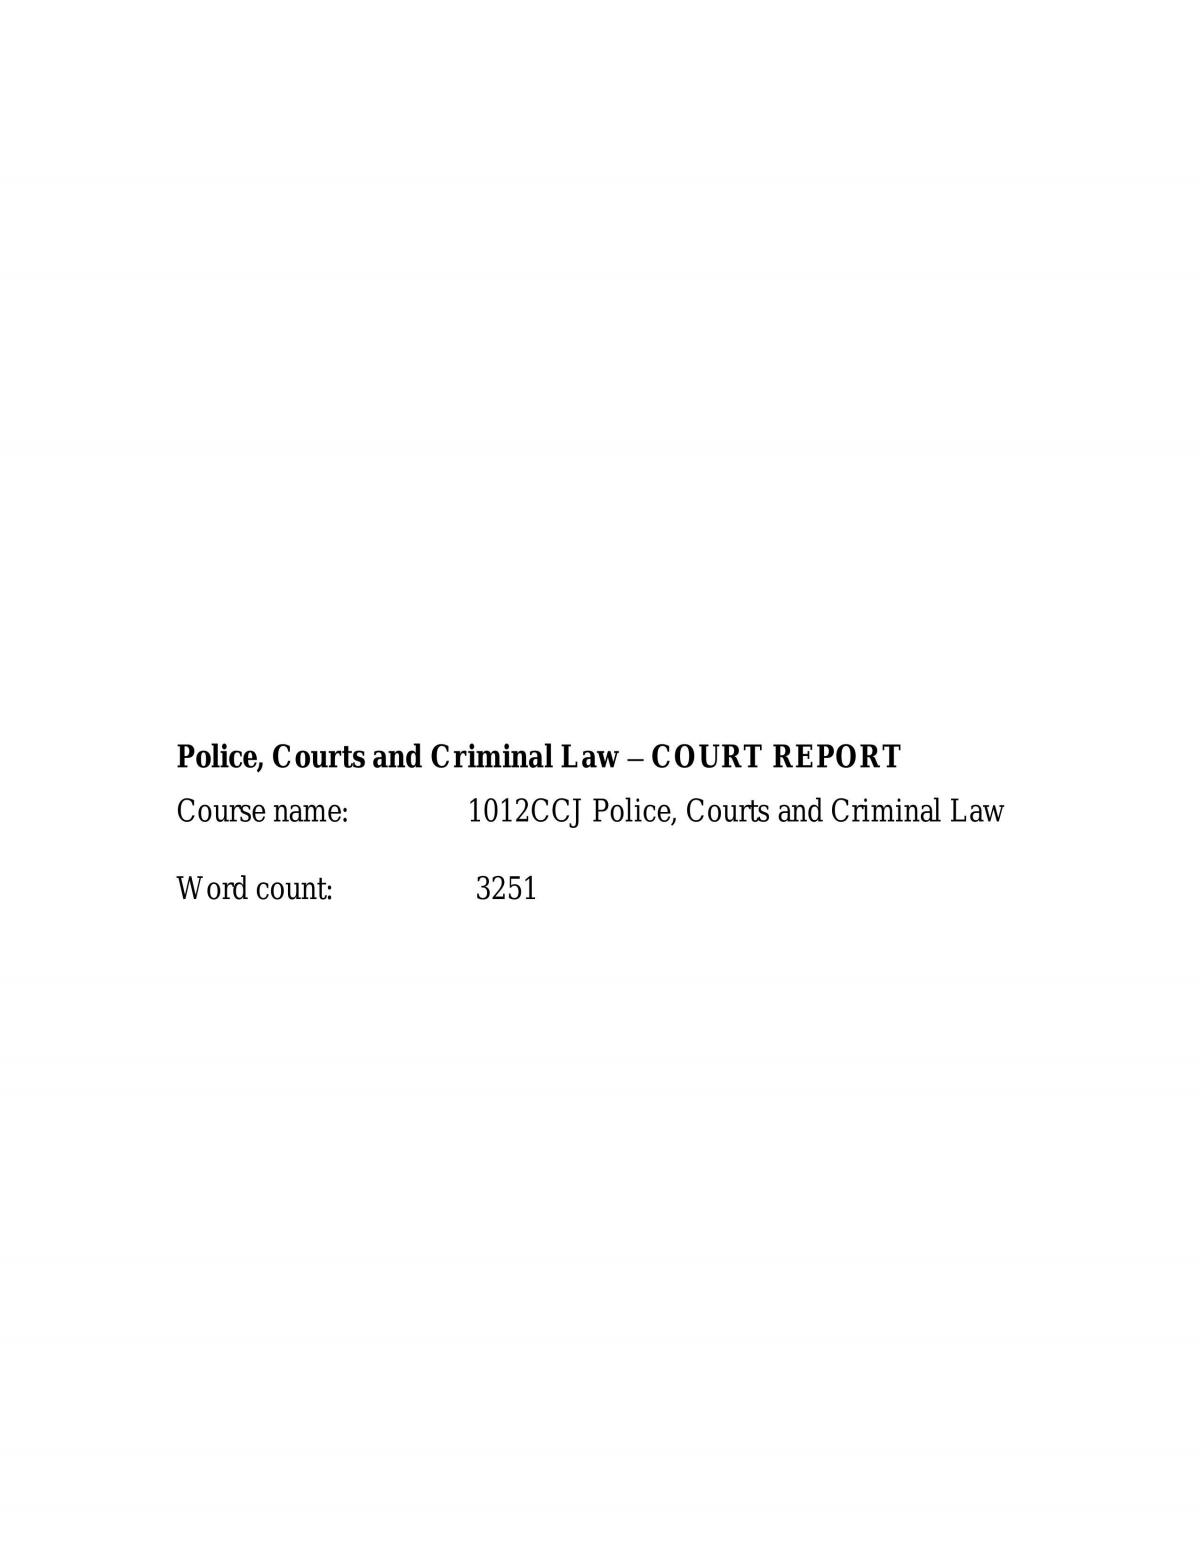 Court report questions 1012CCJ Police Courts Criminal Law